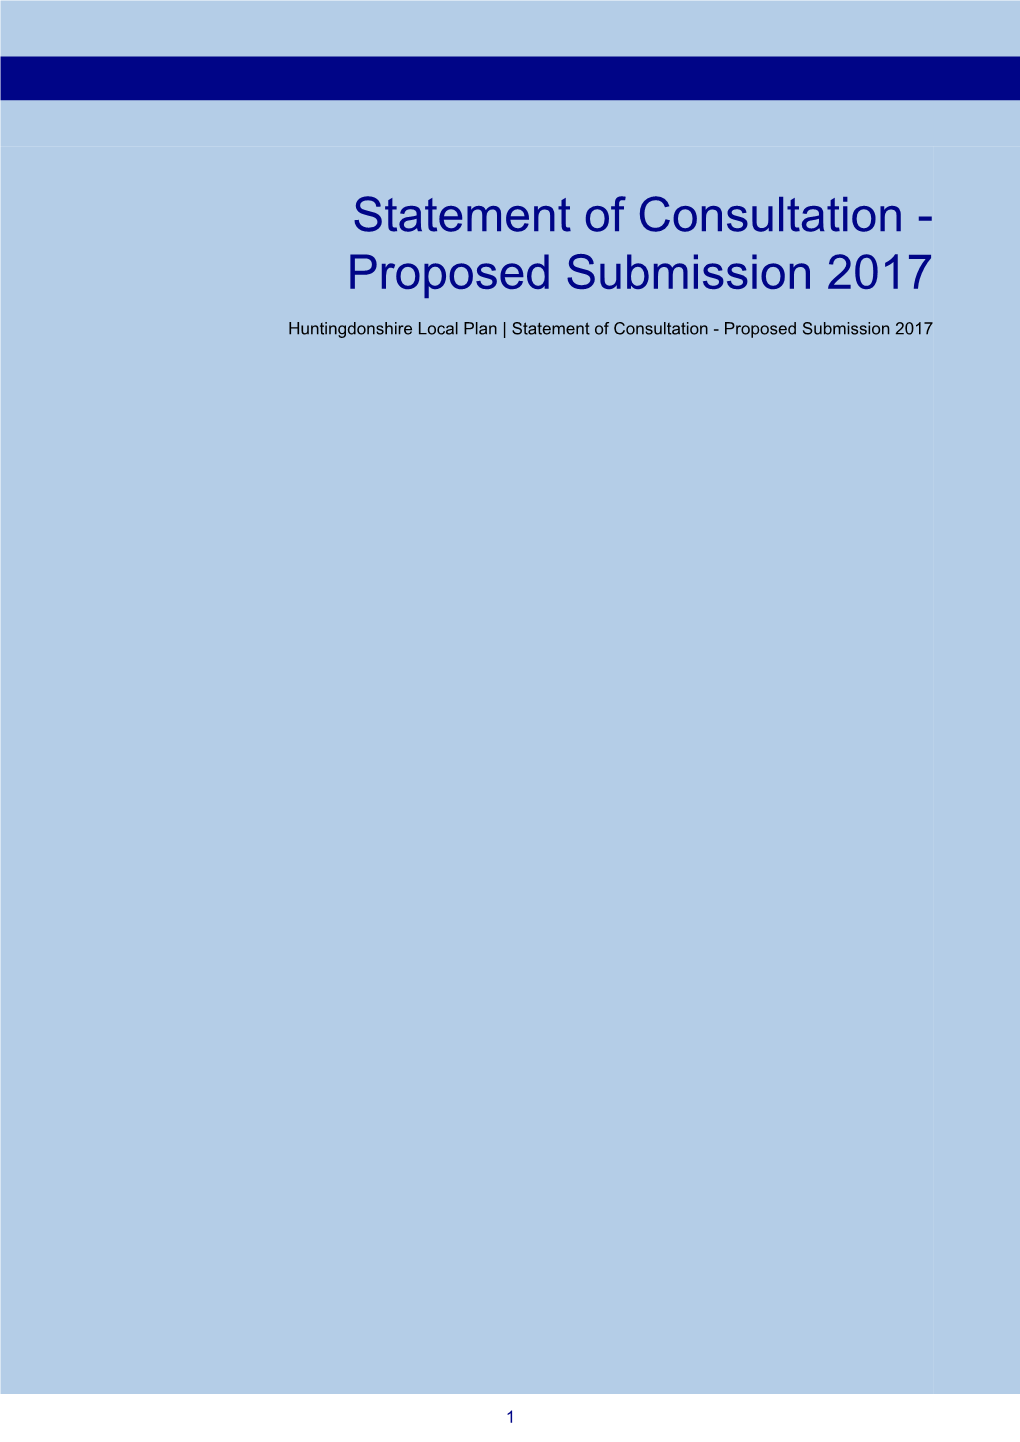 Statement of Consultation - Proposed Submission 2017